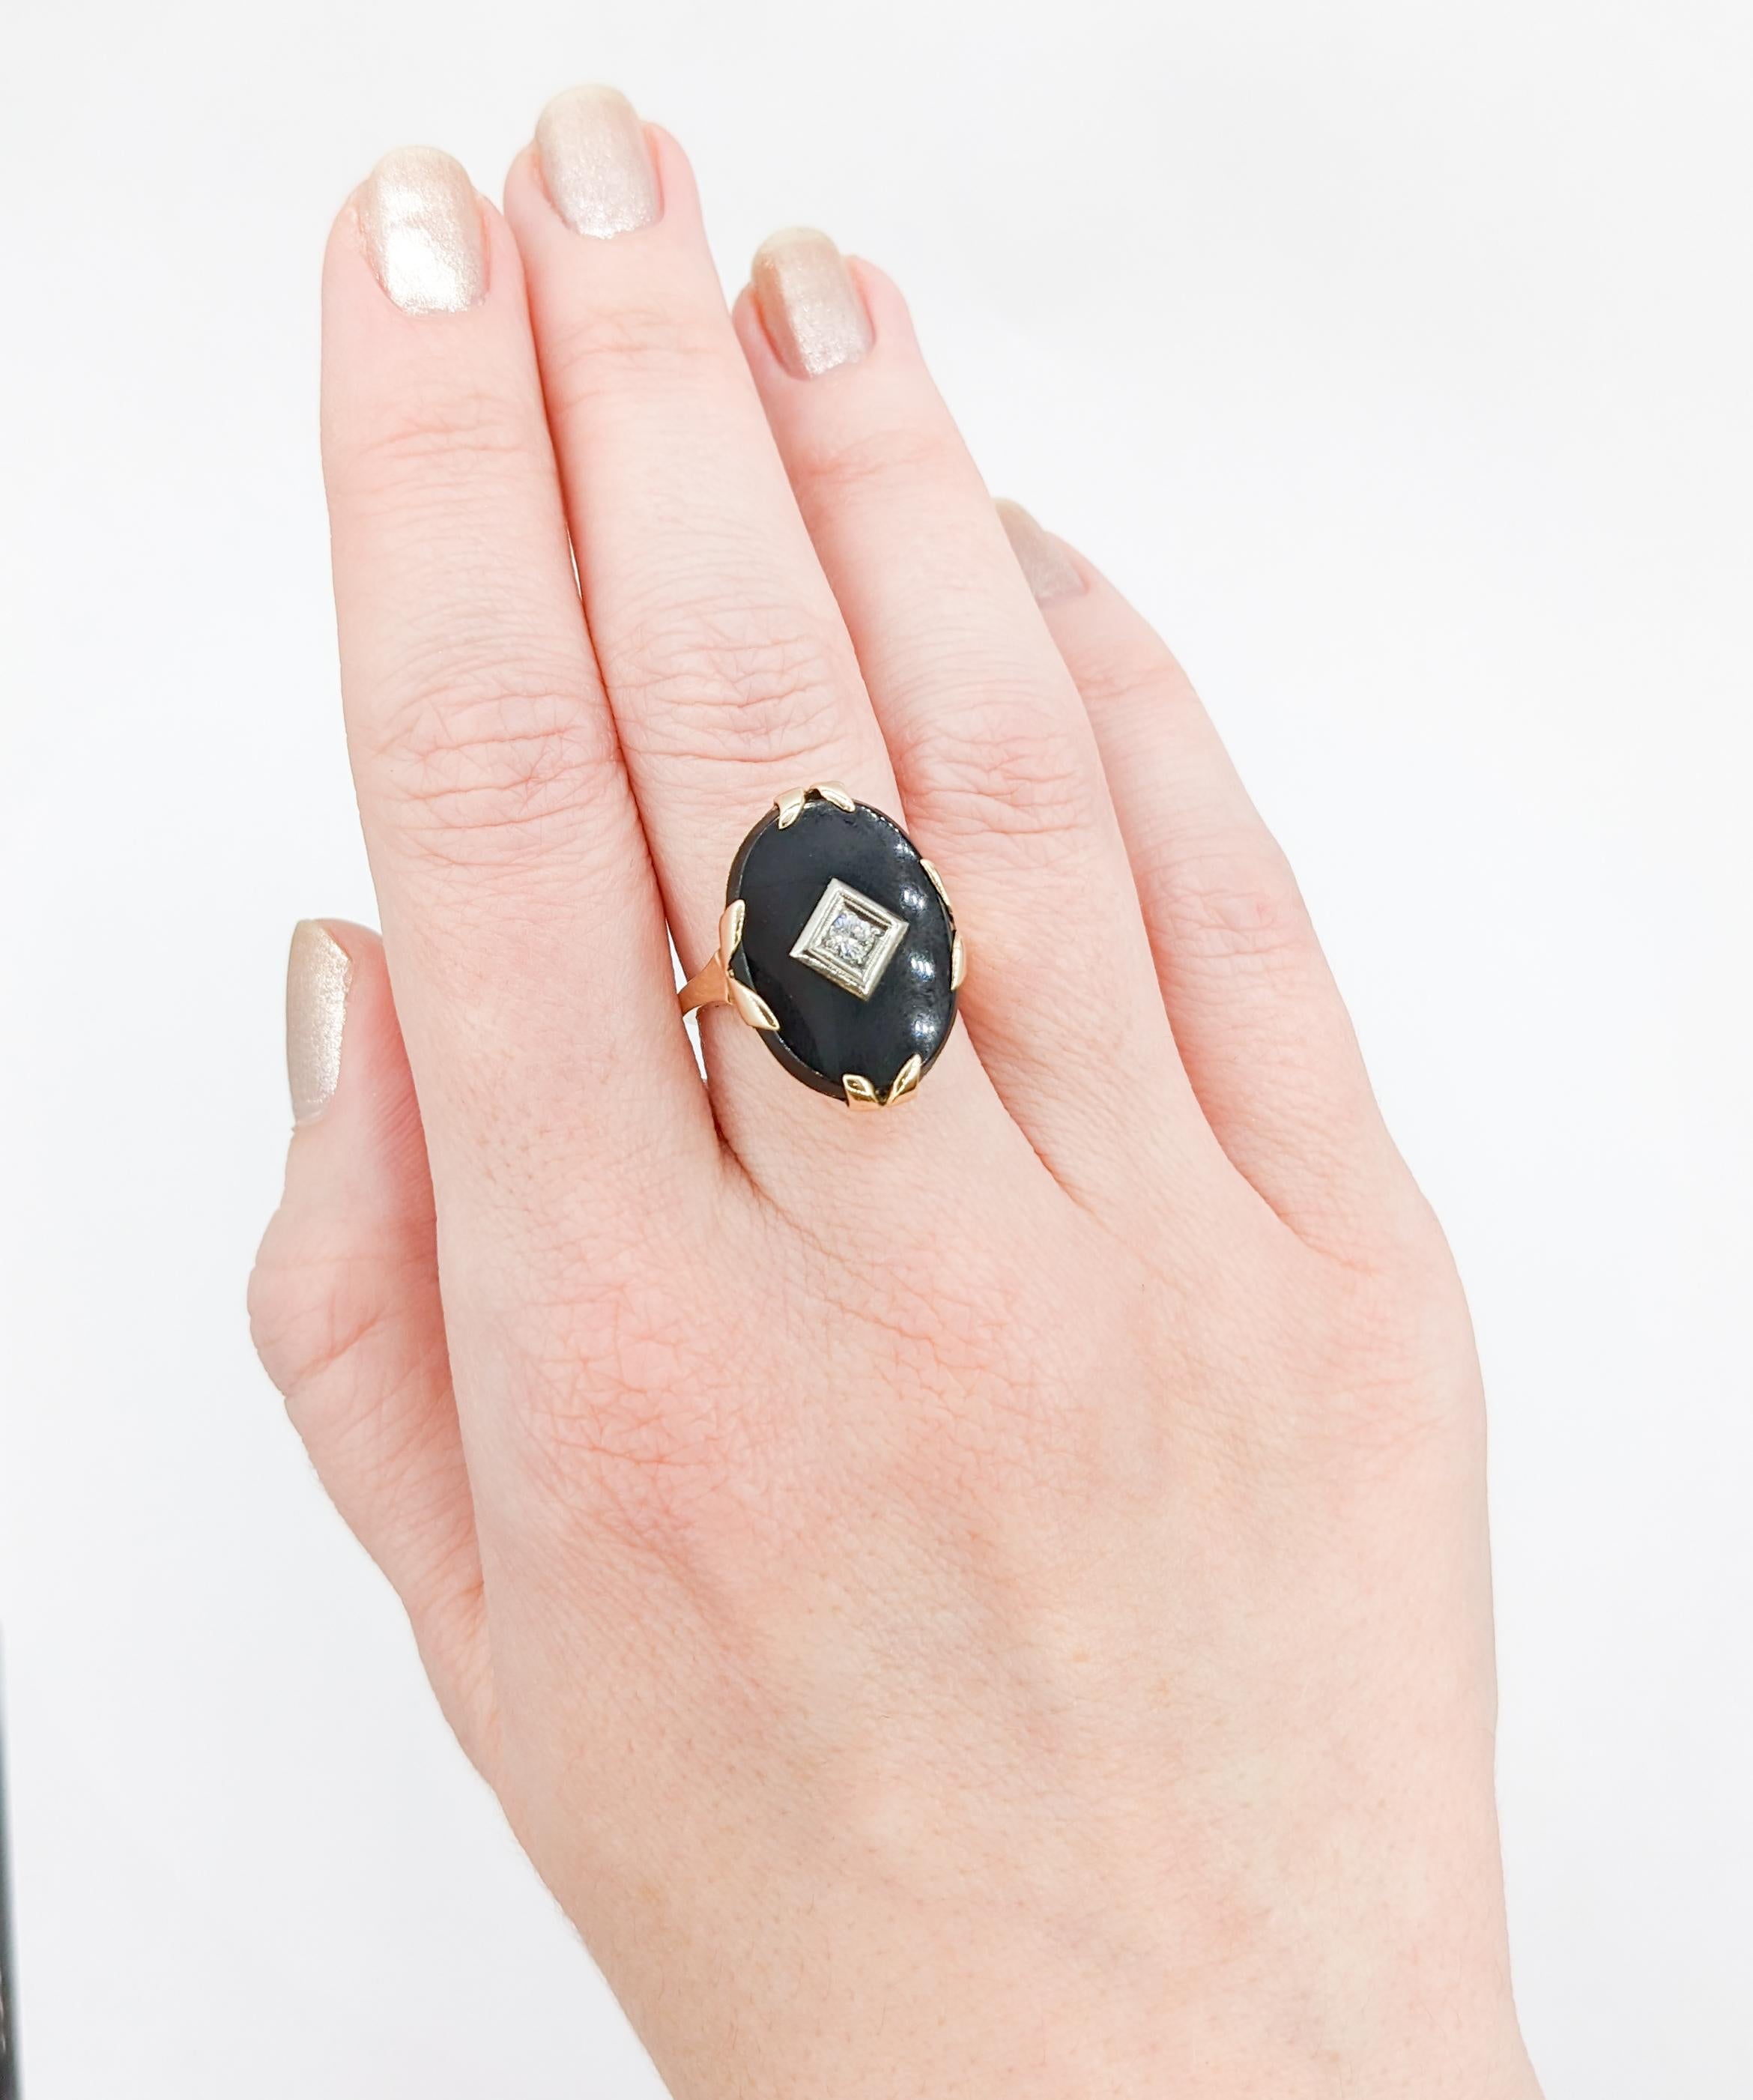 Fantastic Vintage Onyx & Diamond Ring in 10K Gold

Introducing a stunning vintage onyx ring exquisitely crafted in 10K yellow gold. This alluring piece showcases a striking 21x15mm black Onyx gemstone, offering a captivating contrast against the